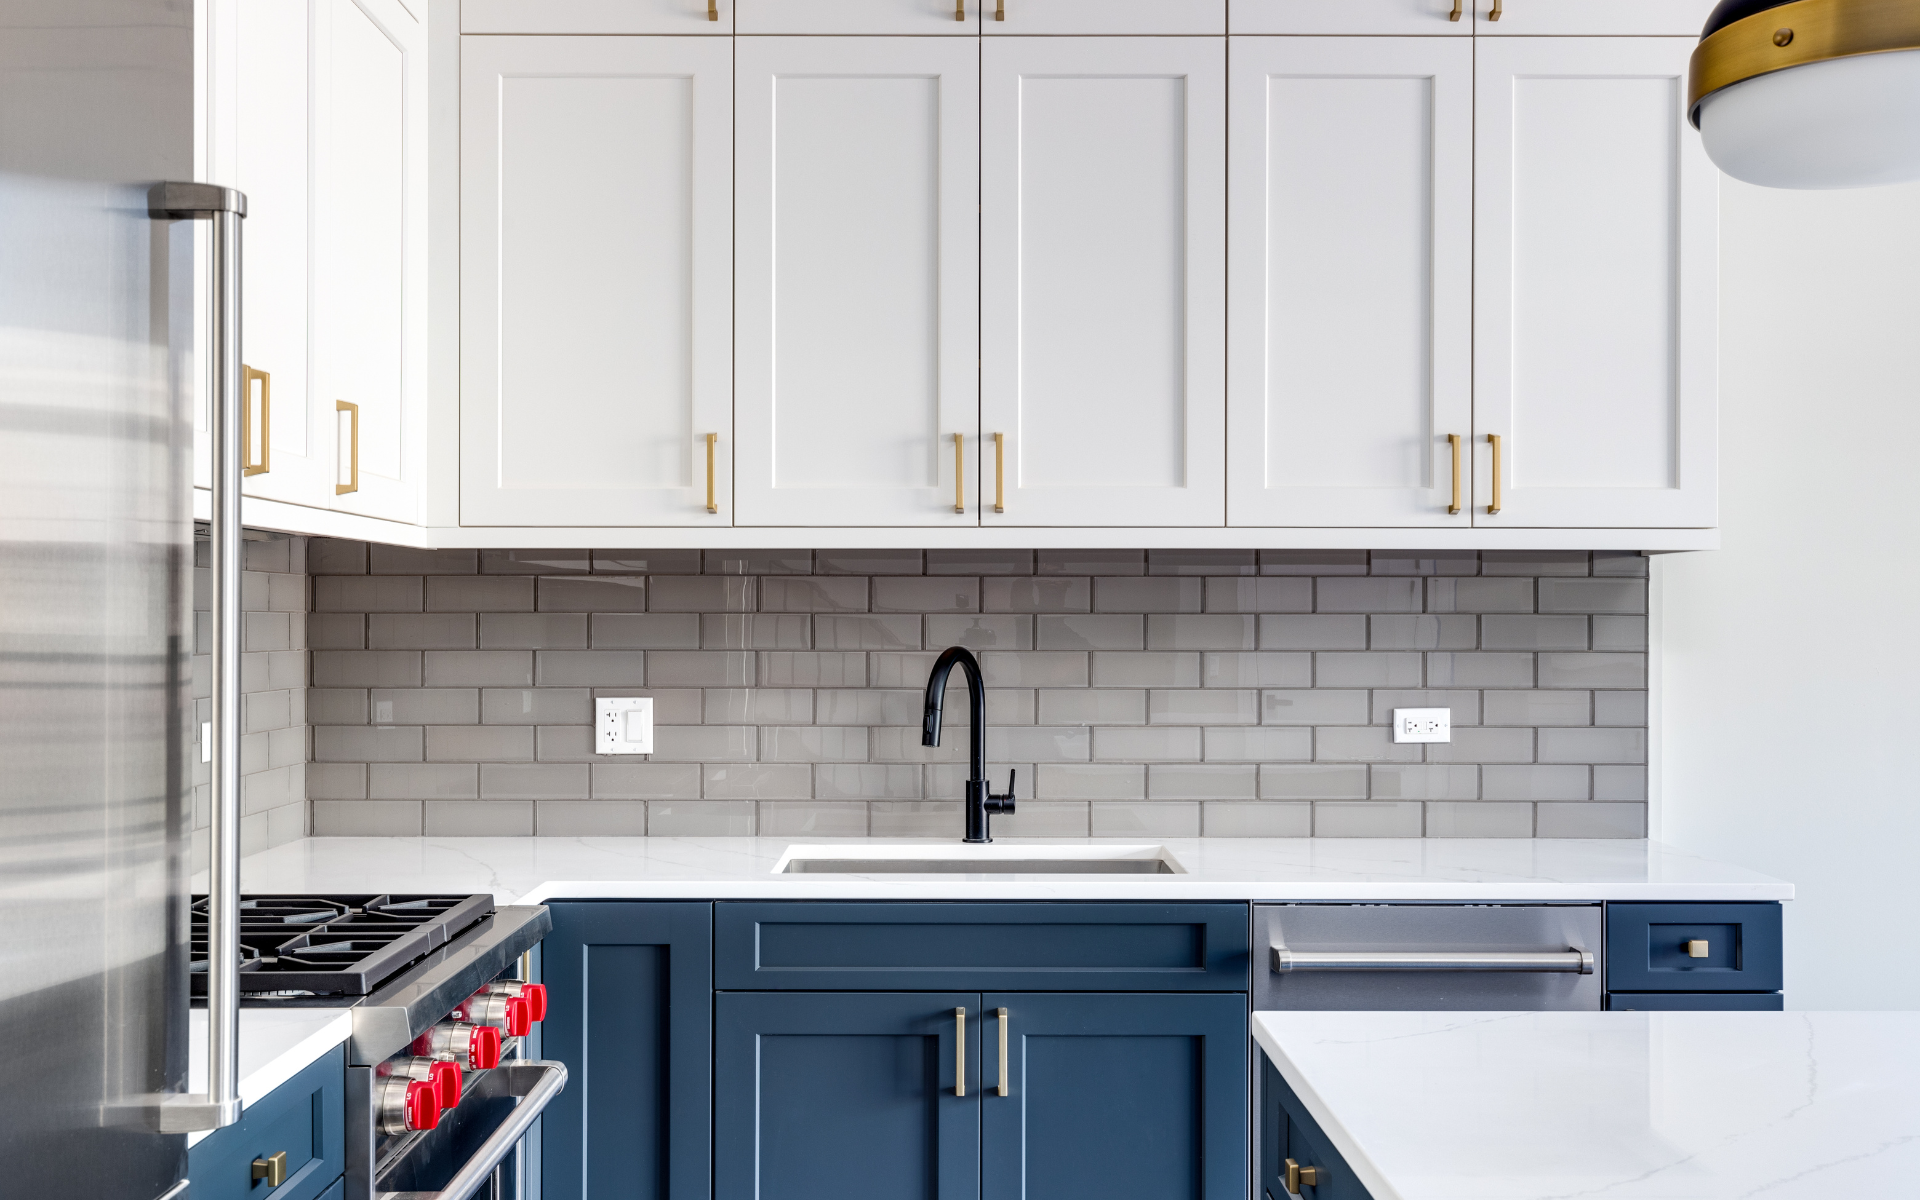 Elegant kitchen with white and blue cabinets and classic subway tiles for backsplash